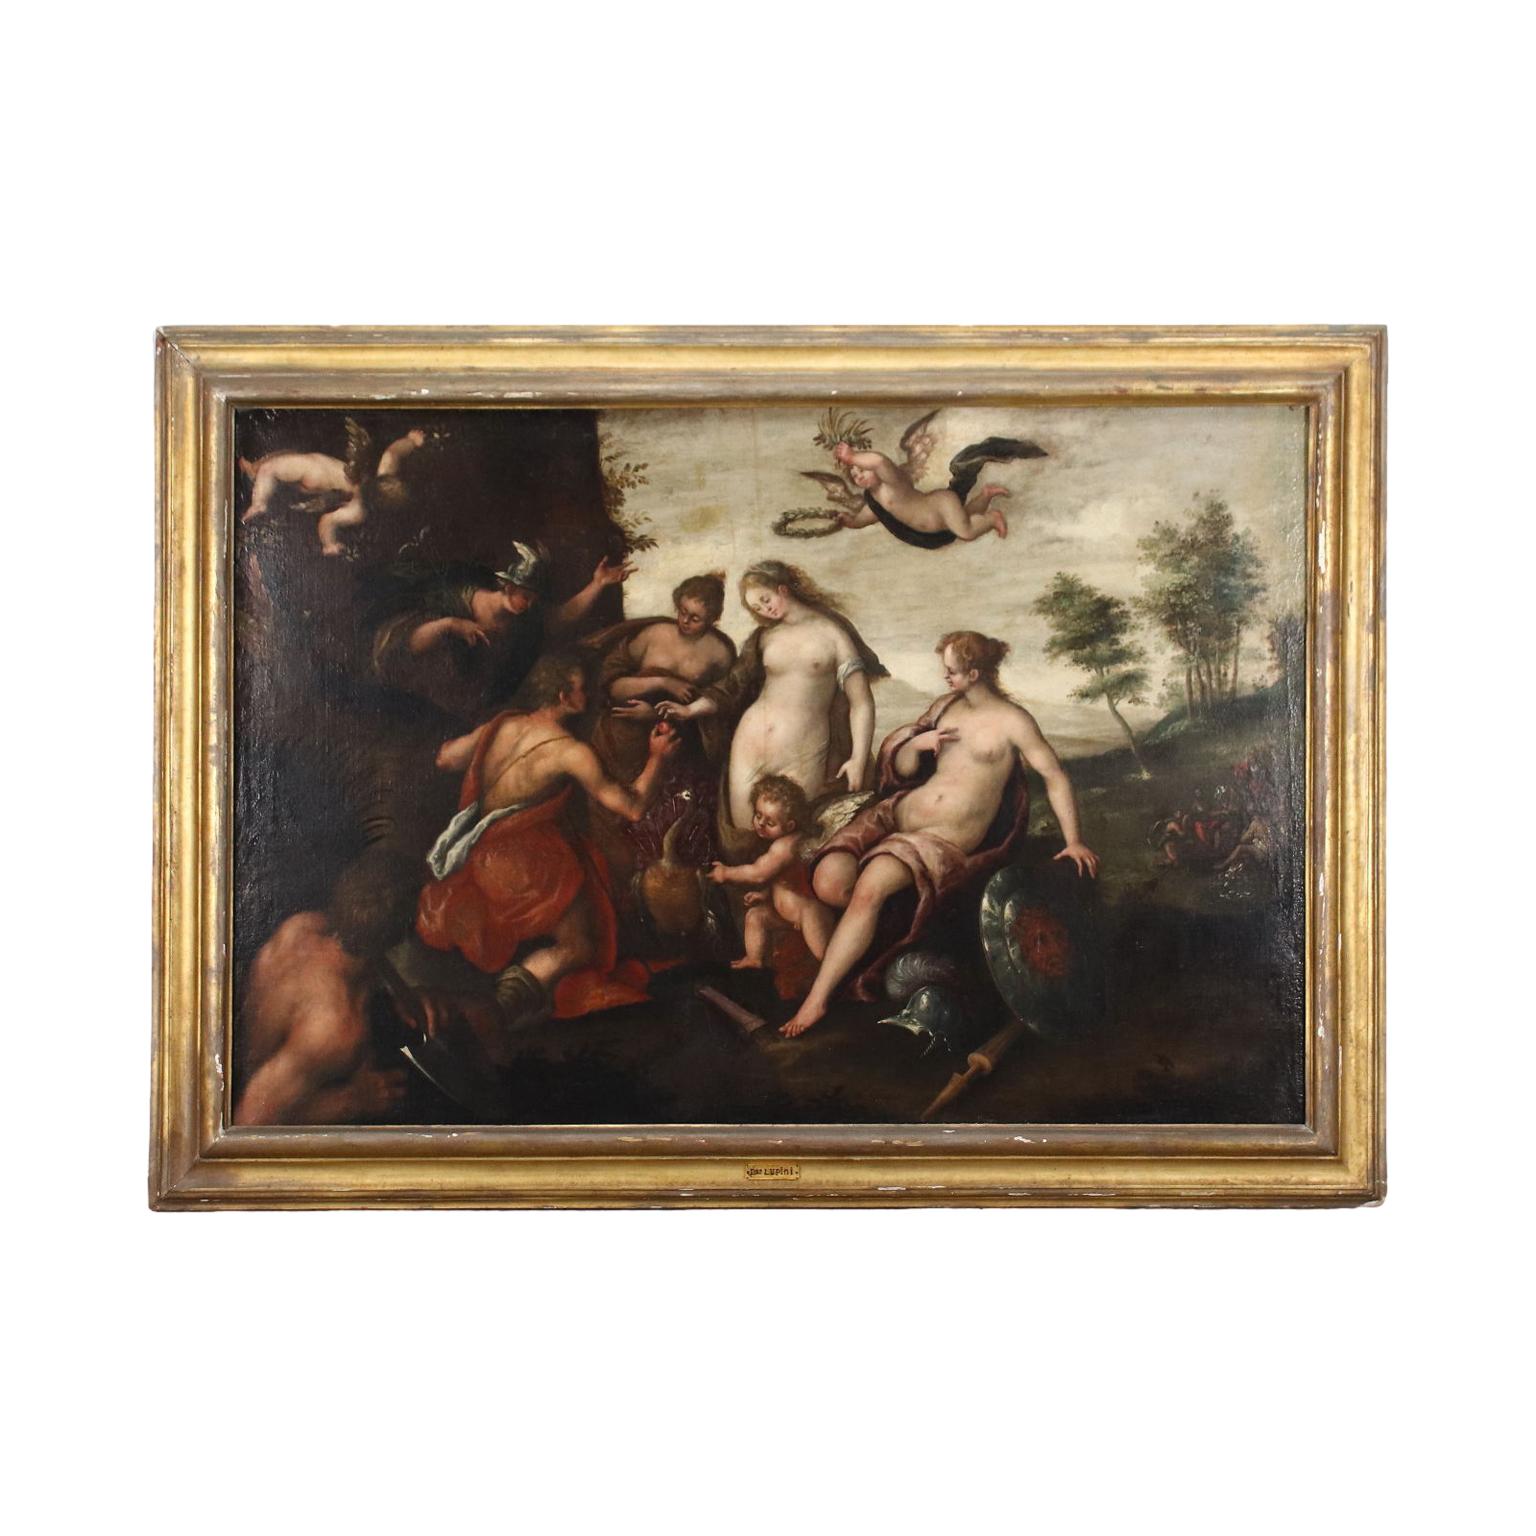 Unknown Figurative Painting - 'Judgment of Paris' Domenico Lupini attributed to, late XVIth century, oil paint